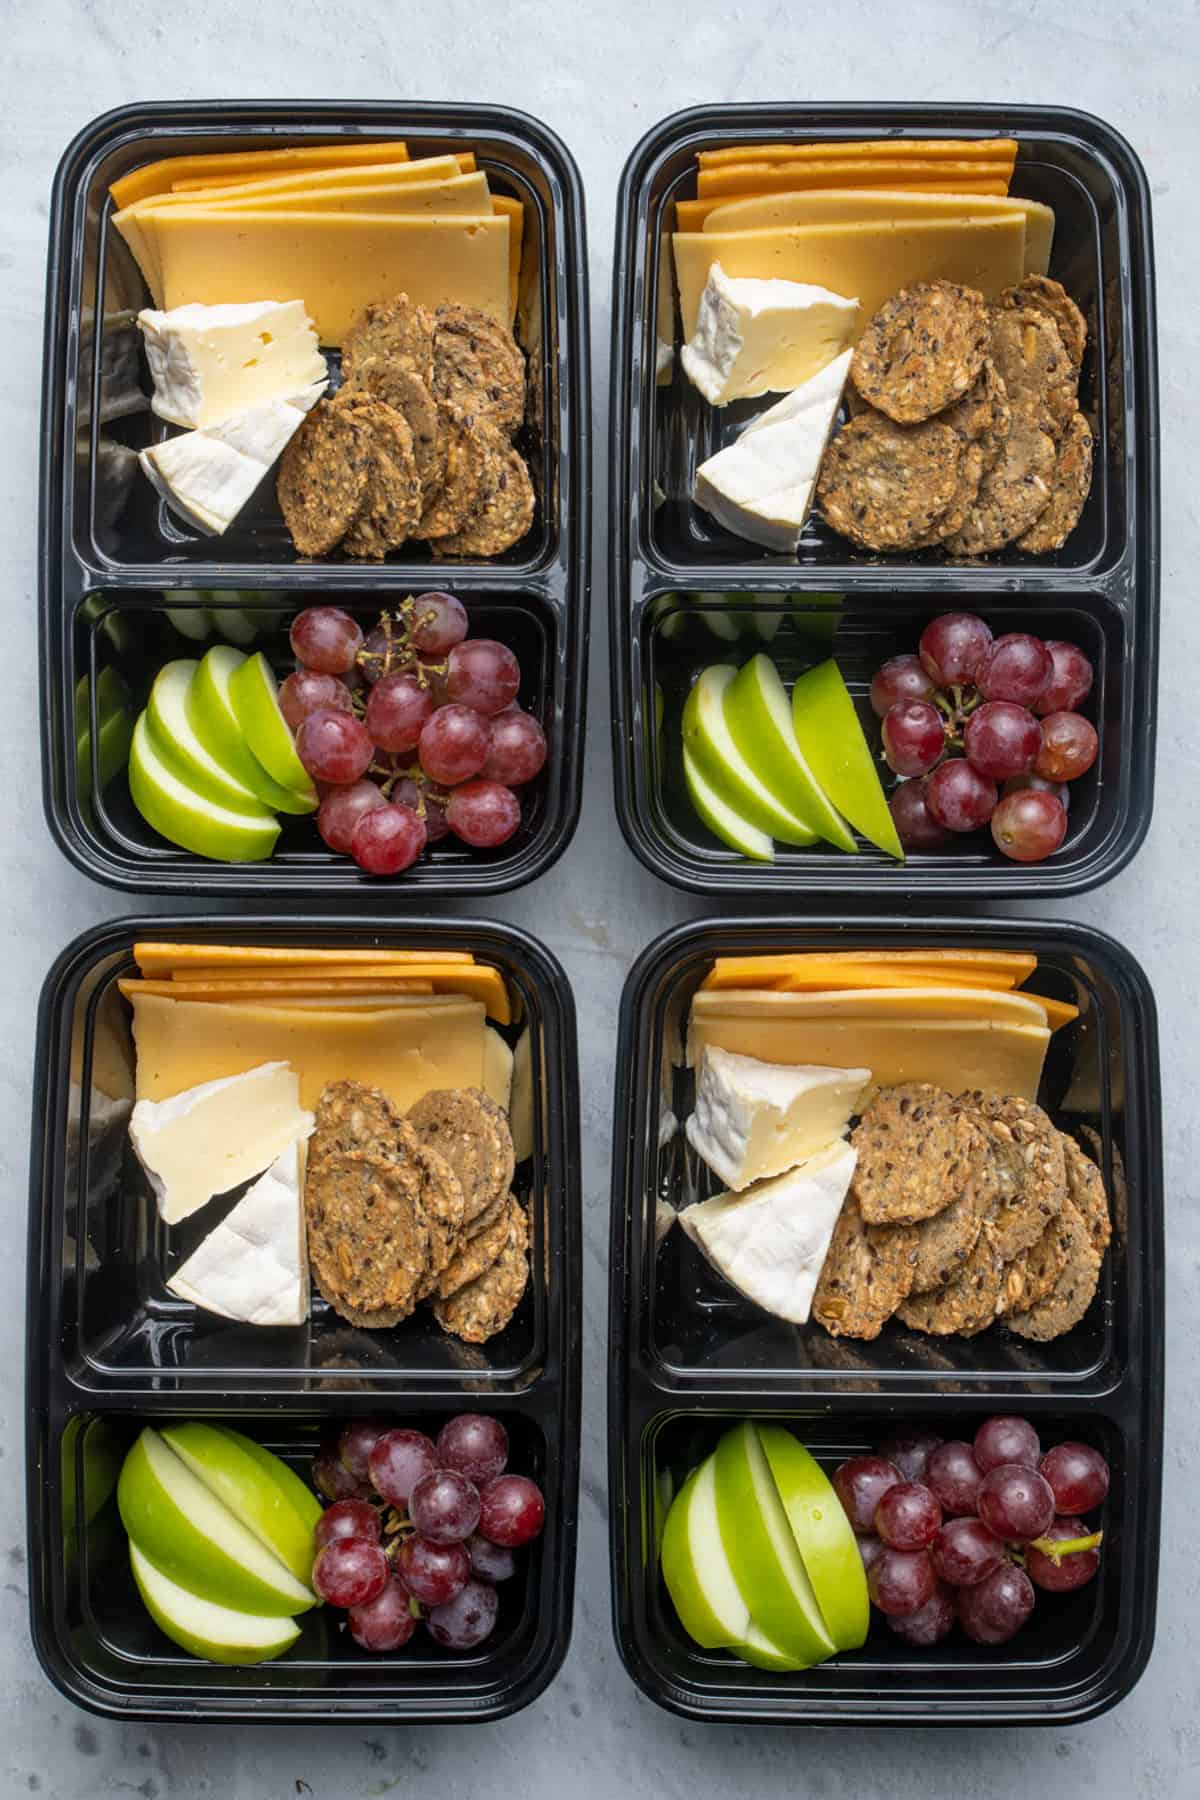 https://feelgoodfoodie.net/wp-content/uploads/2021/09/Cheese-Fruit-Snack-Box-07.jpg